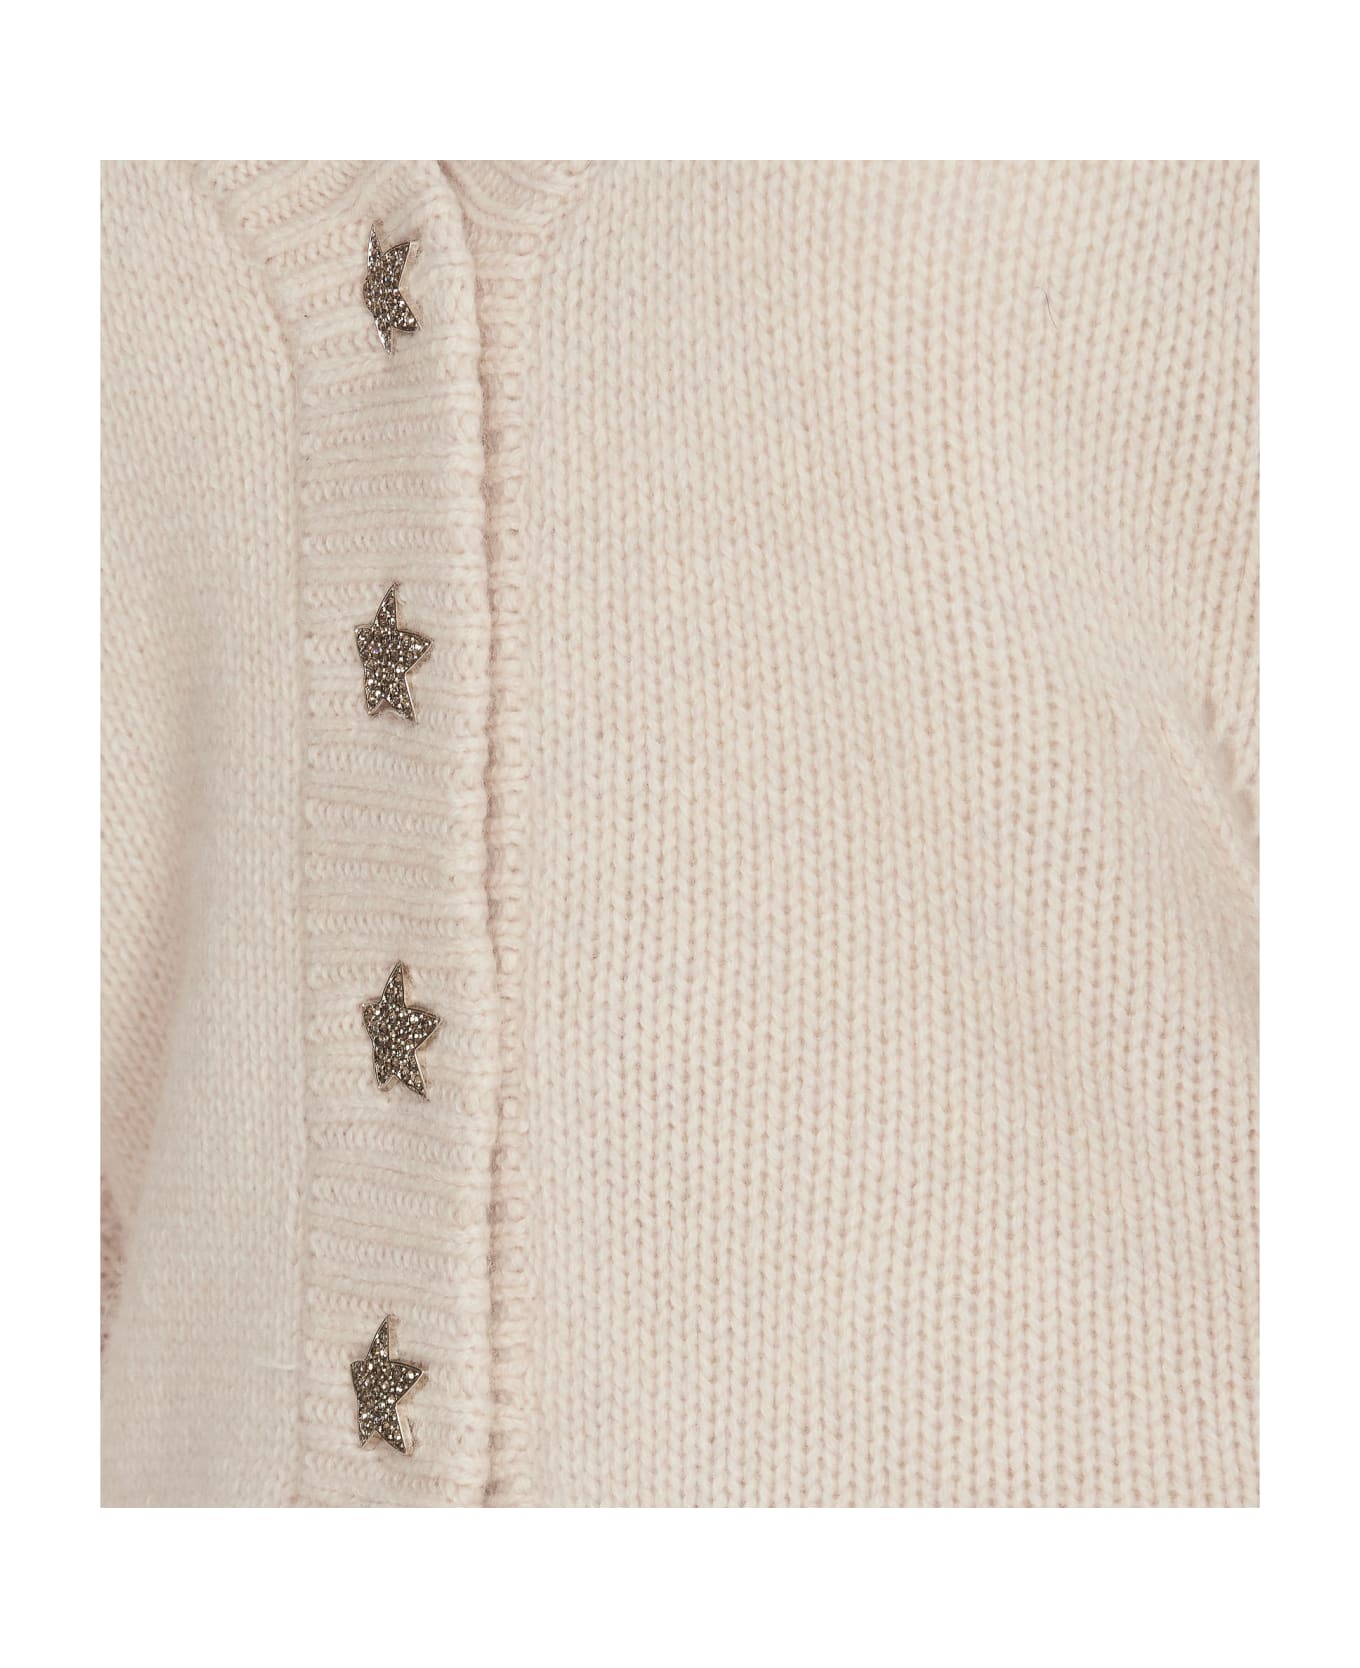 Zadig & Voltaire Betsy Cashmere Cardigan - Beige カーディガン